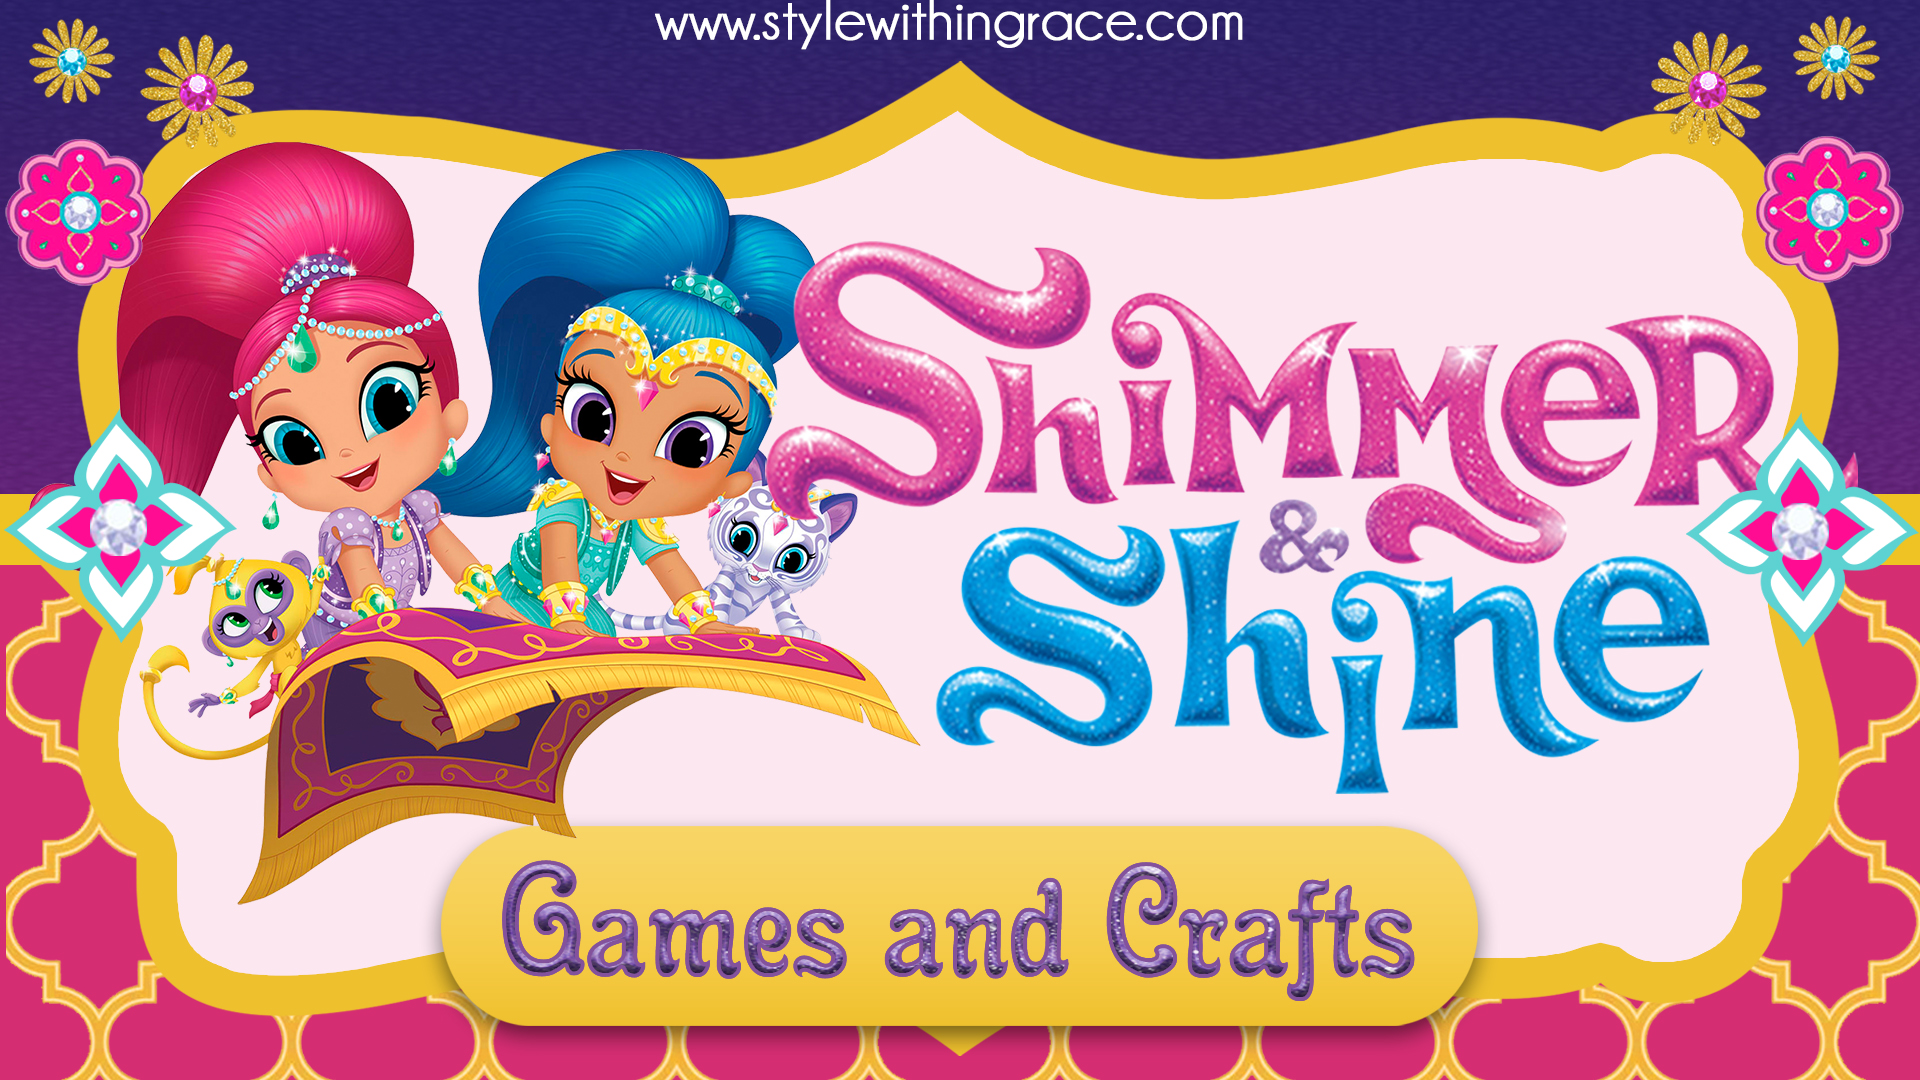 How to Throw a Simple Shimmer and Shine Party at Home Kids Activities Blog